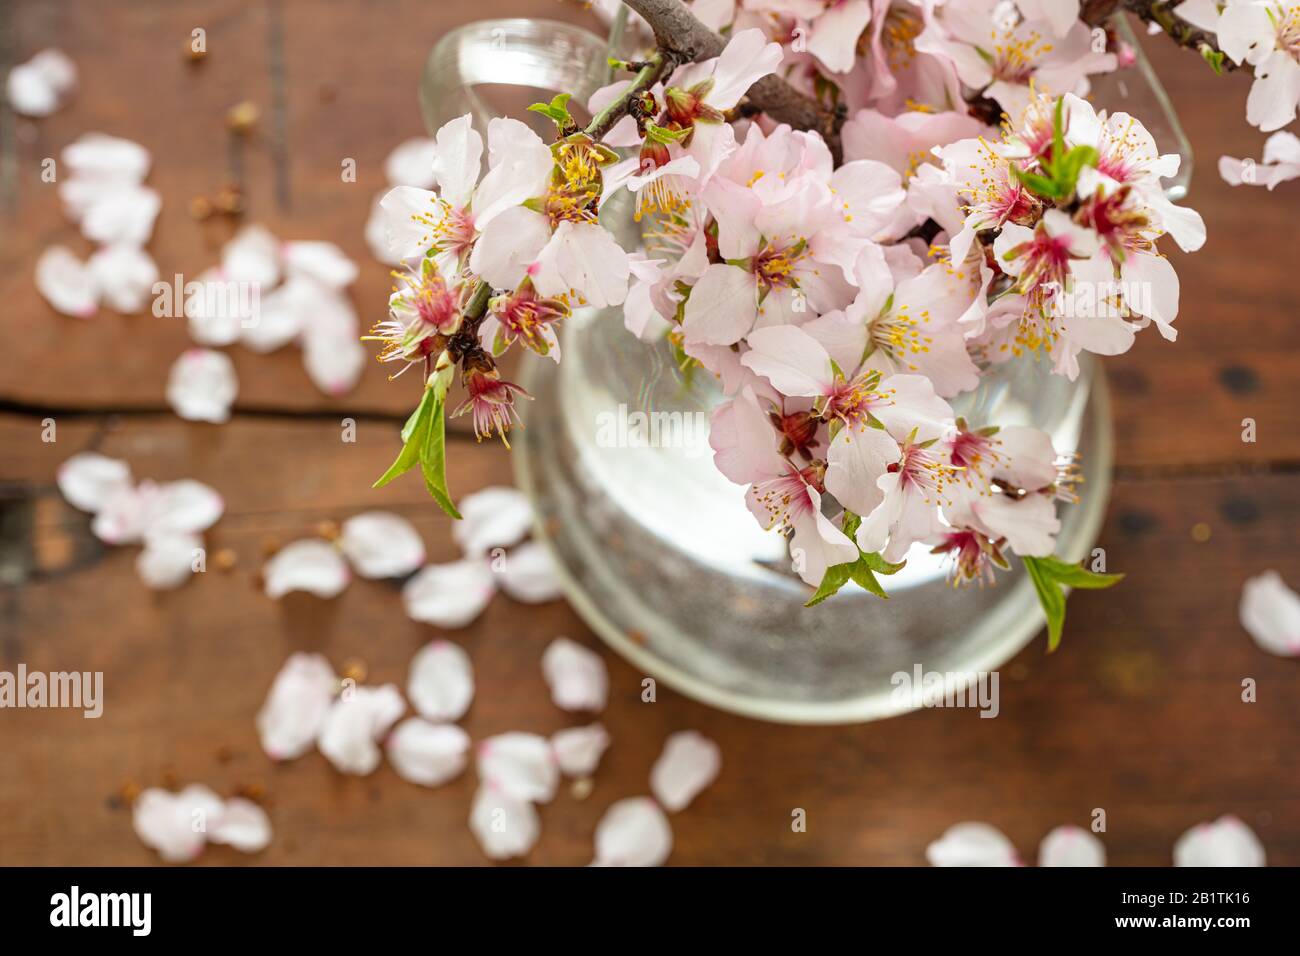 Almond tree twig blooming, flowers and fresh green leaves, close up view. Springtime seasonal natural decoration, bouquet in a vase, wood table backgr Stock Photo